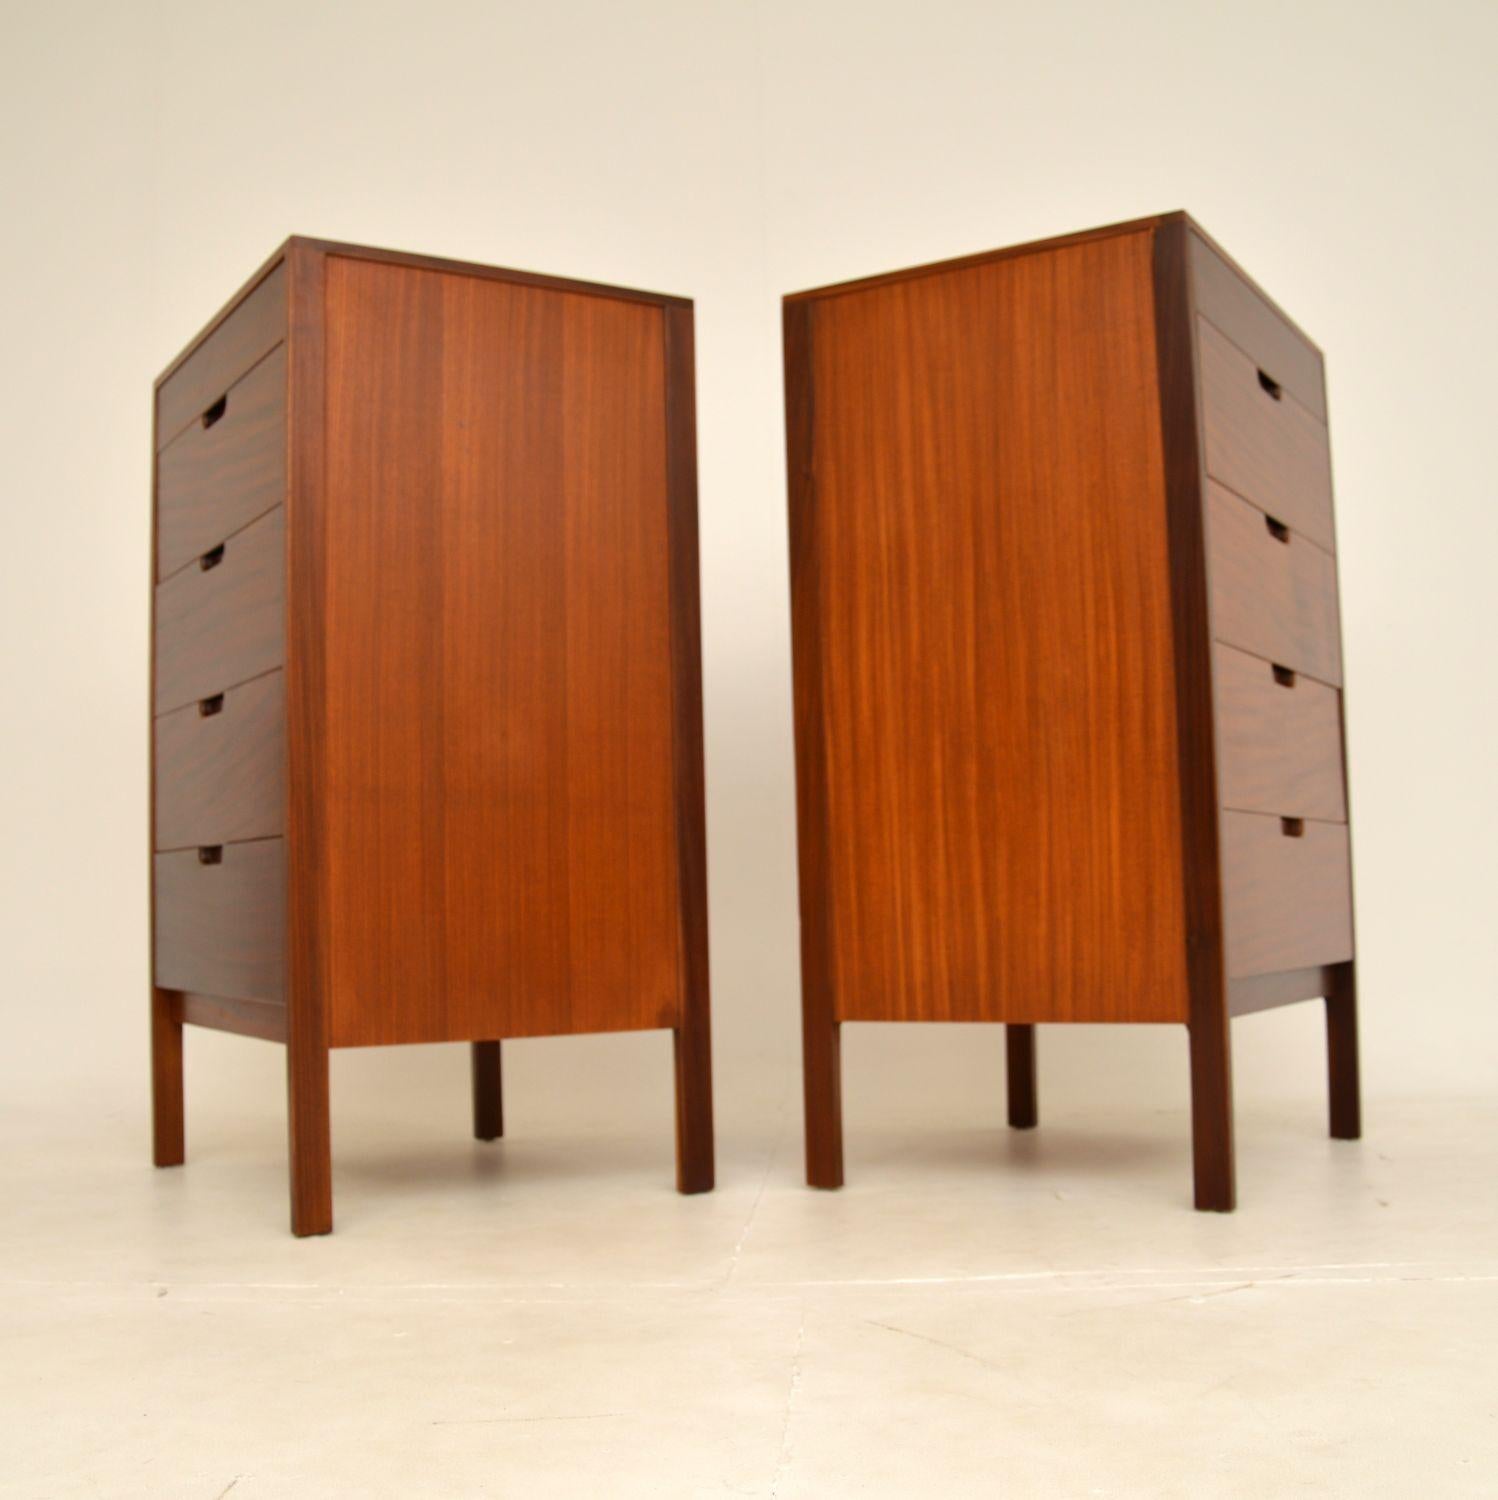 British 1960s Pair of Vintage Chest of Drawers by Richard Hornby